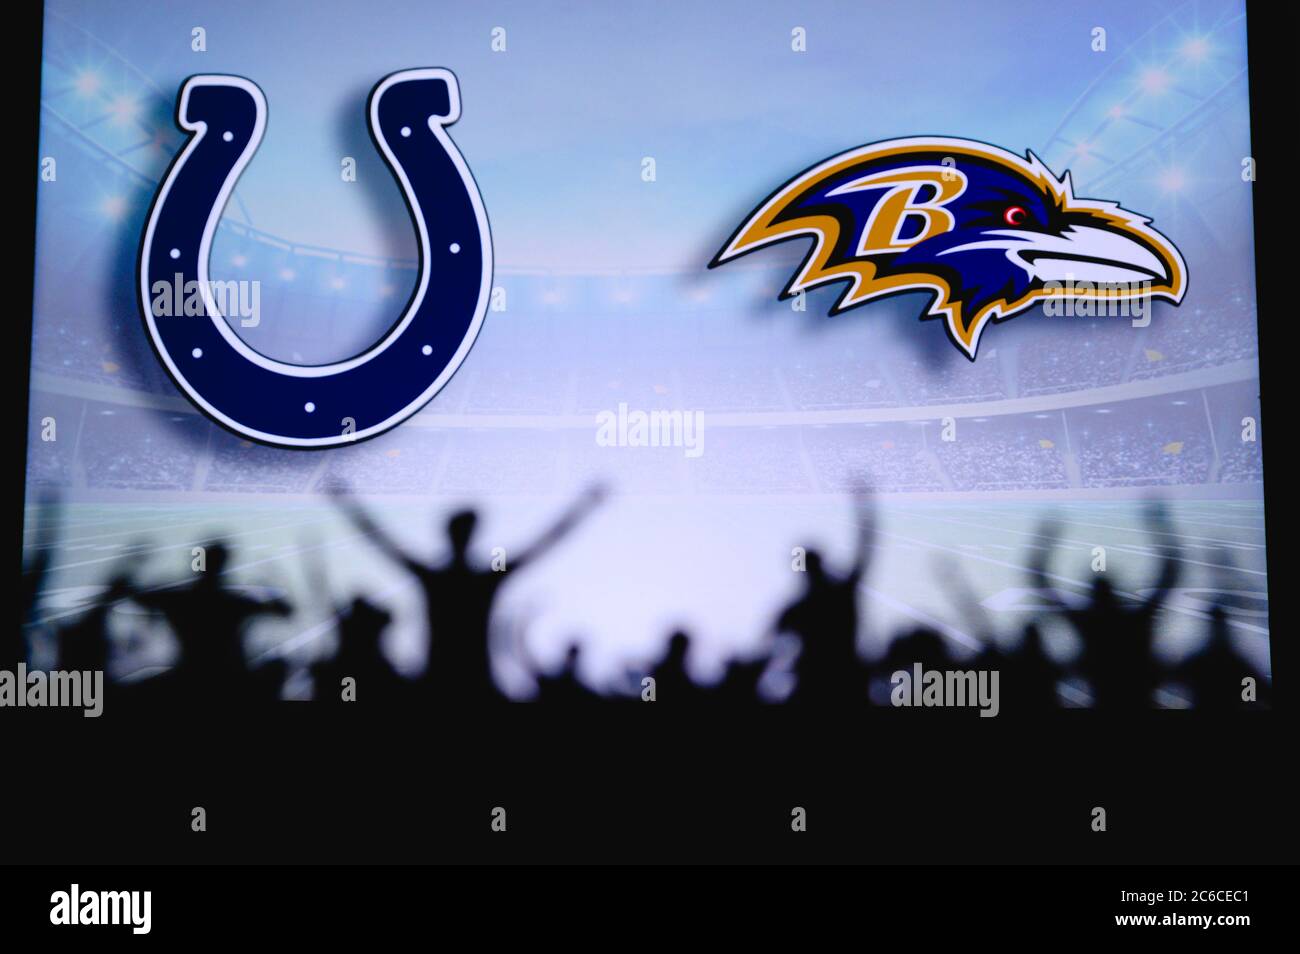 Indianapolis Colts vs. Baltimore Ravens. Fans support on NFL Game. Silhouette of supporters, big screen with two rivals in background. Stock Photo